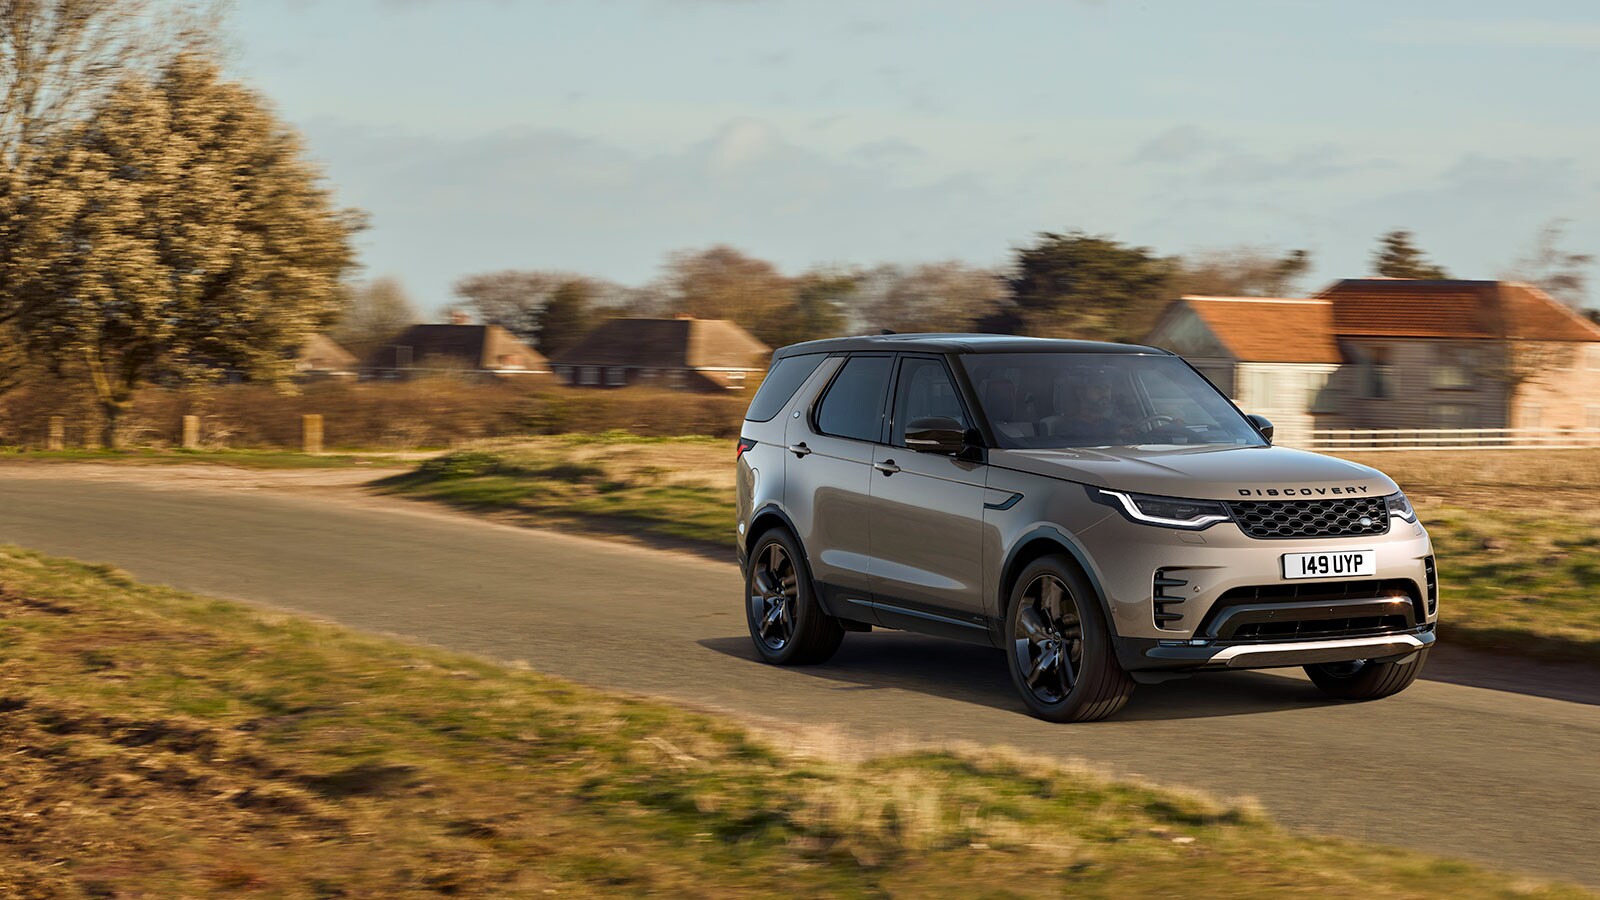 THE NEW LAND ROVER DISCOVERY